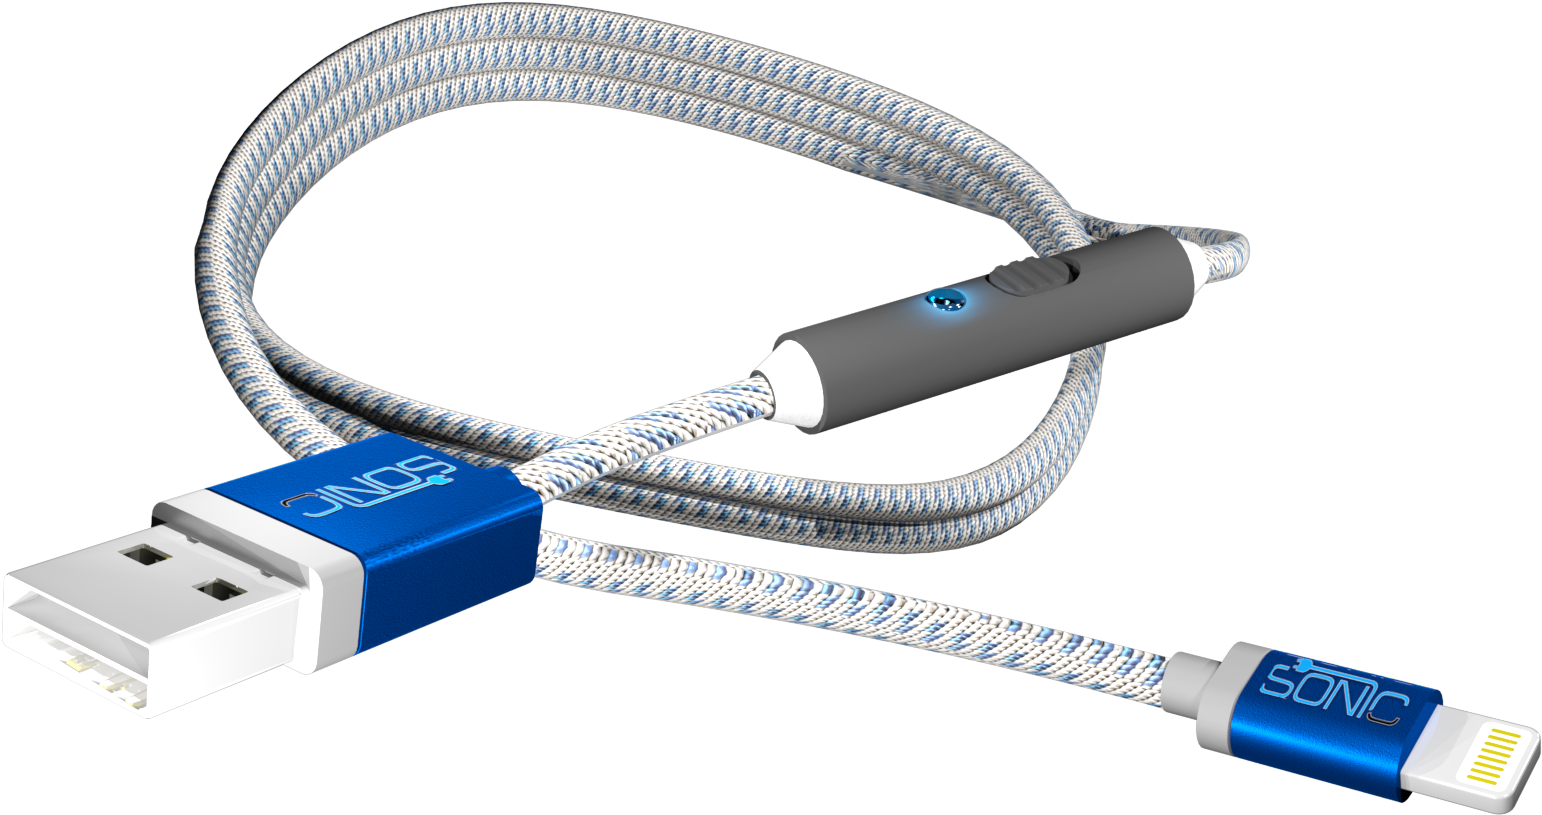 A Blue And White Cable With A Blue Light